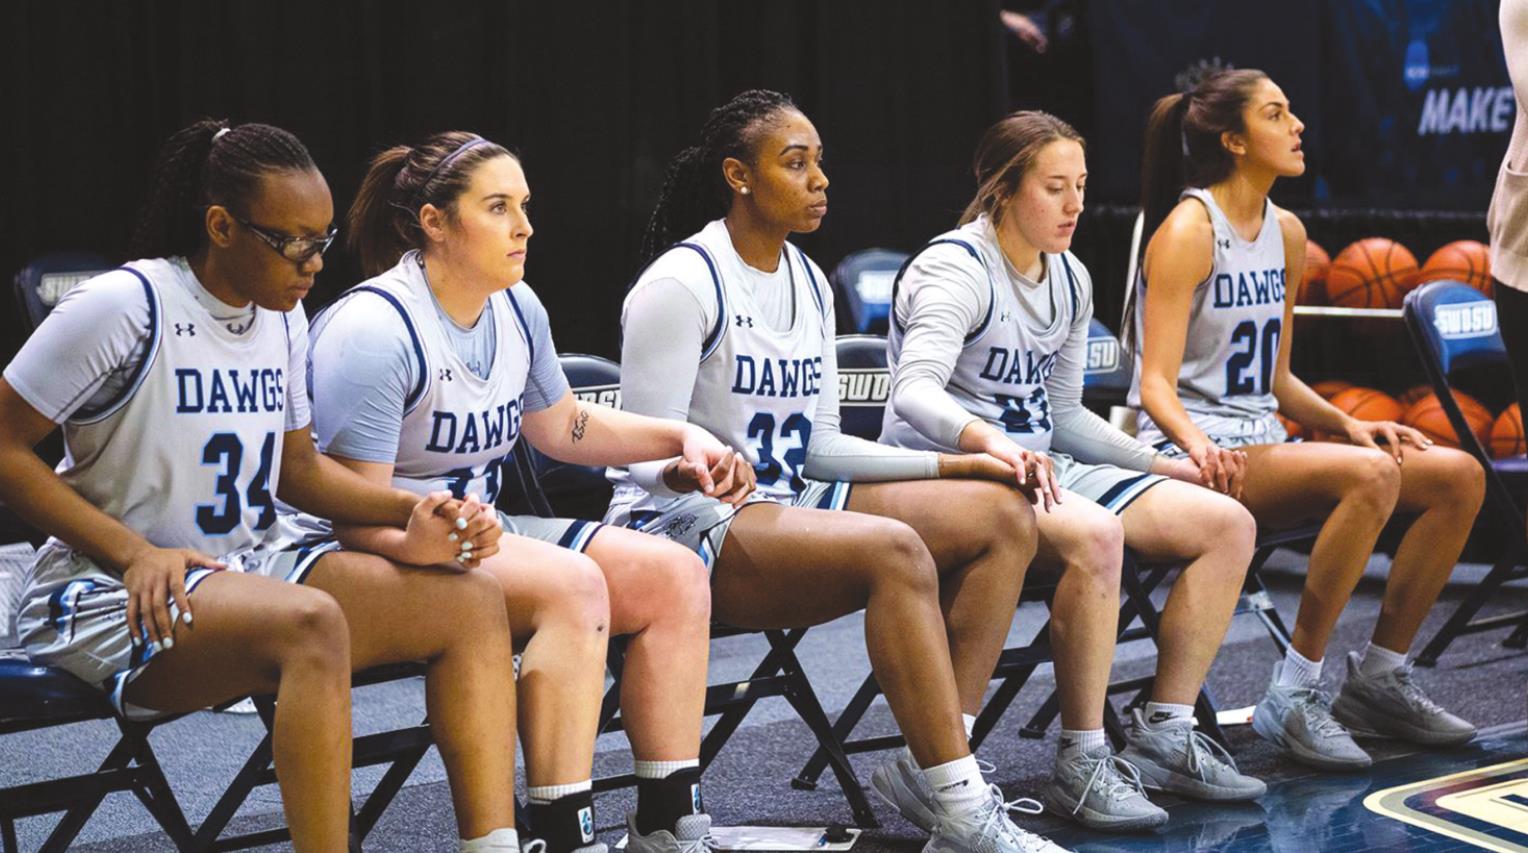 Southwestern Oklahoma State has clinched the top seed for the west division of the Great American Conference. The Lady Bulldogs could host three games at the Pioneer Cellular Event Center. Provided